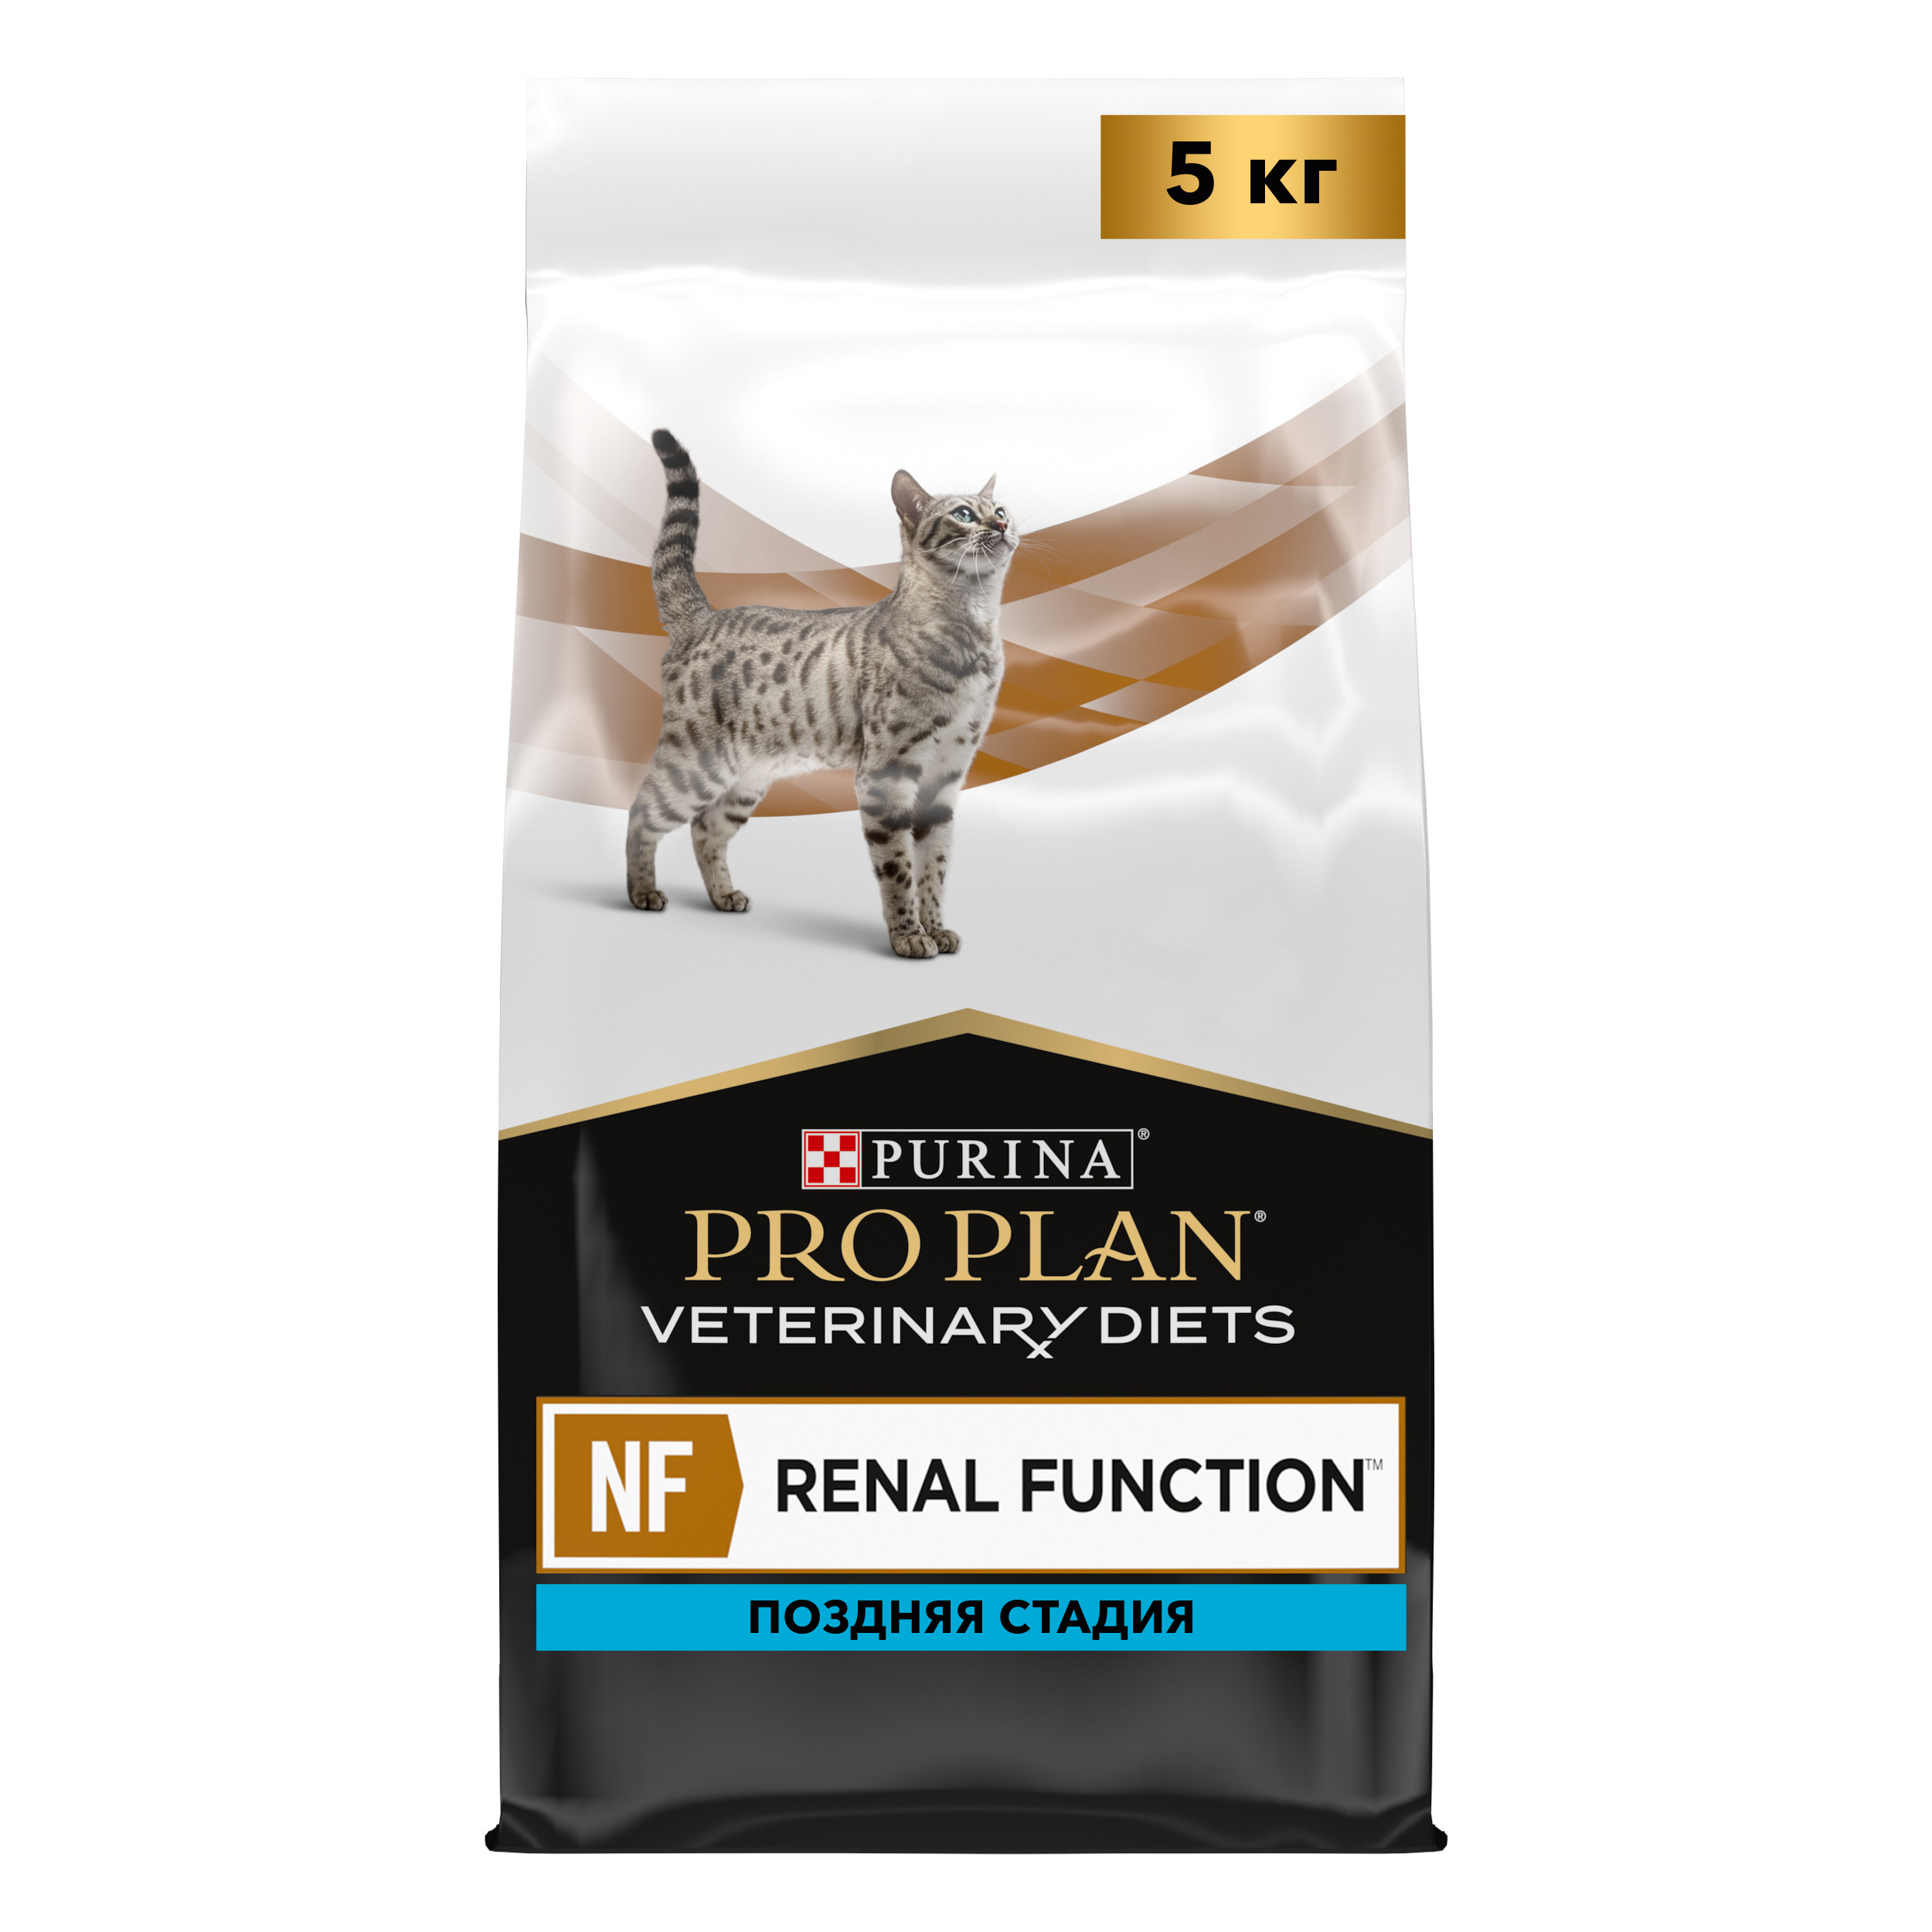 Purina Pro Plan renal function Advanced Care. Pro Plan vet renal NF early Care для кошек. Purina Pro Plan renal function для кошек. Pro Plan Veterinary Diets NF renal function.